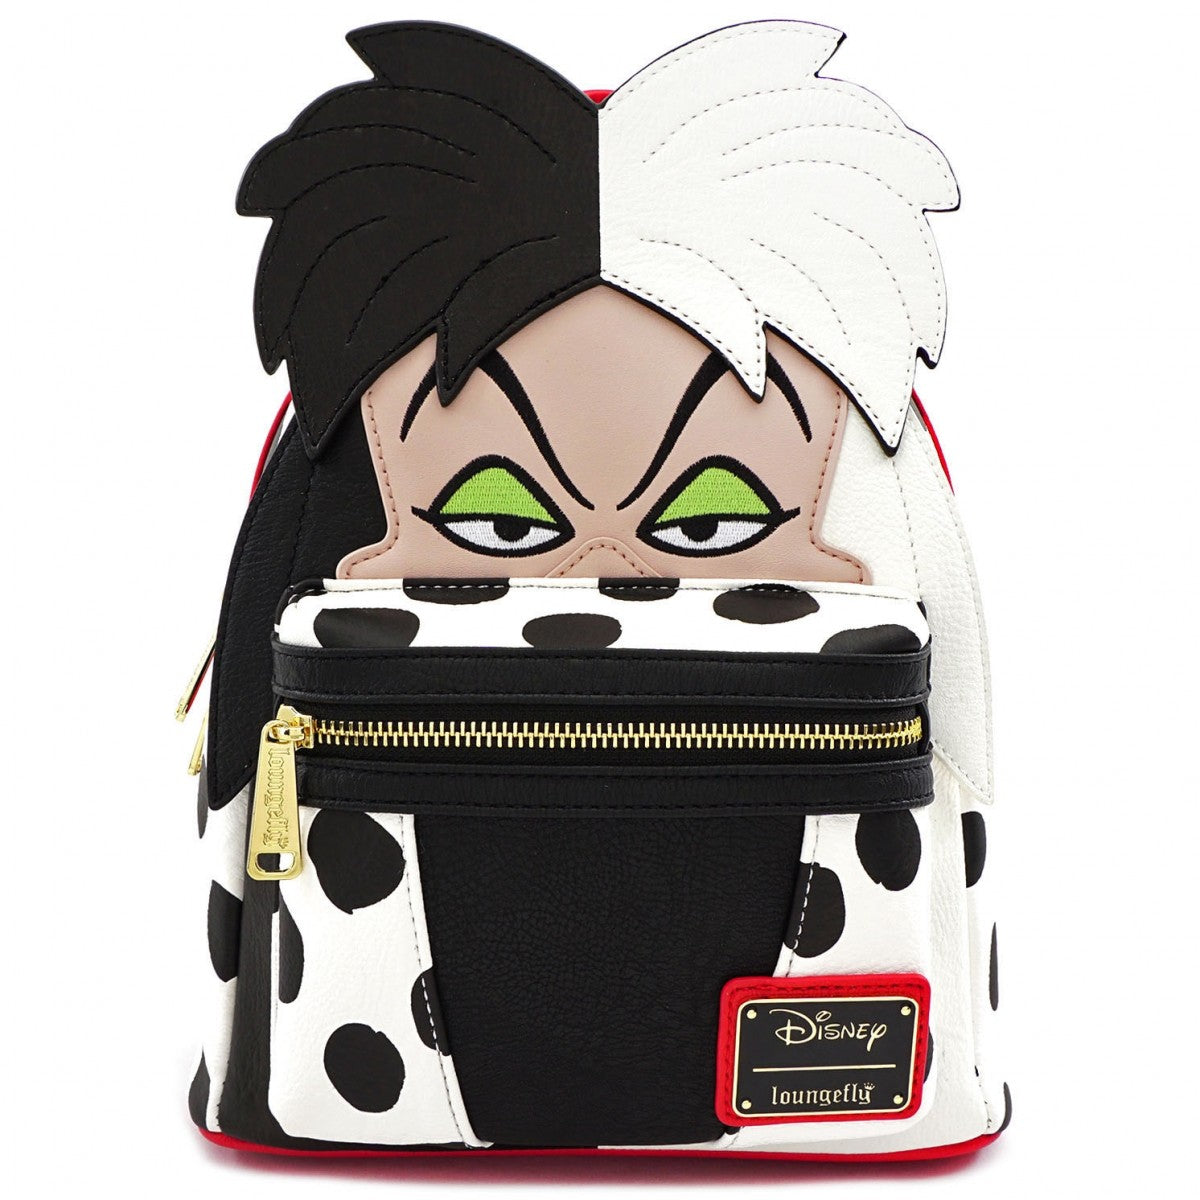 Loungefly x Disney 101 Dalmatians Faux Leather Mini Backpack